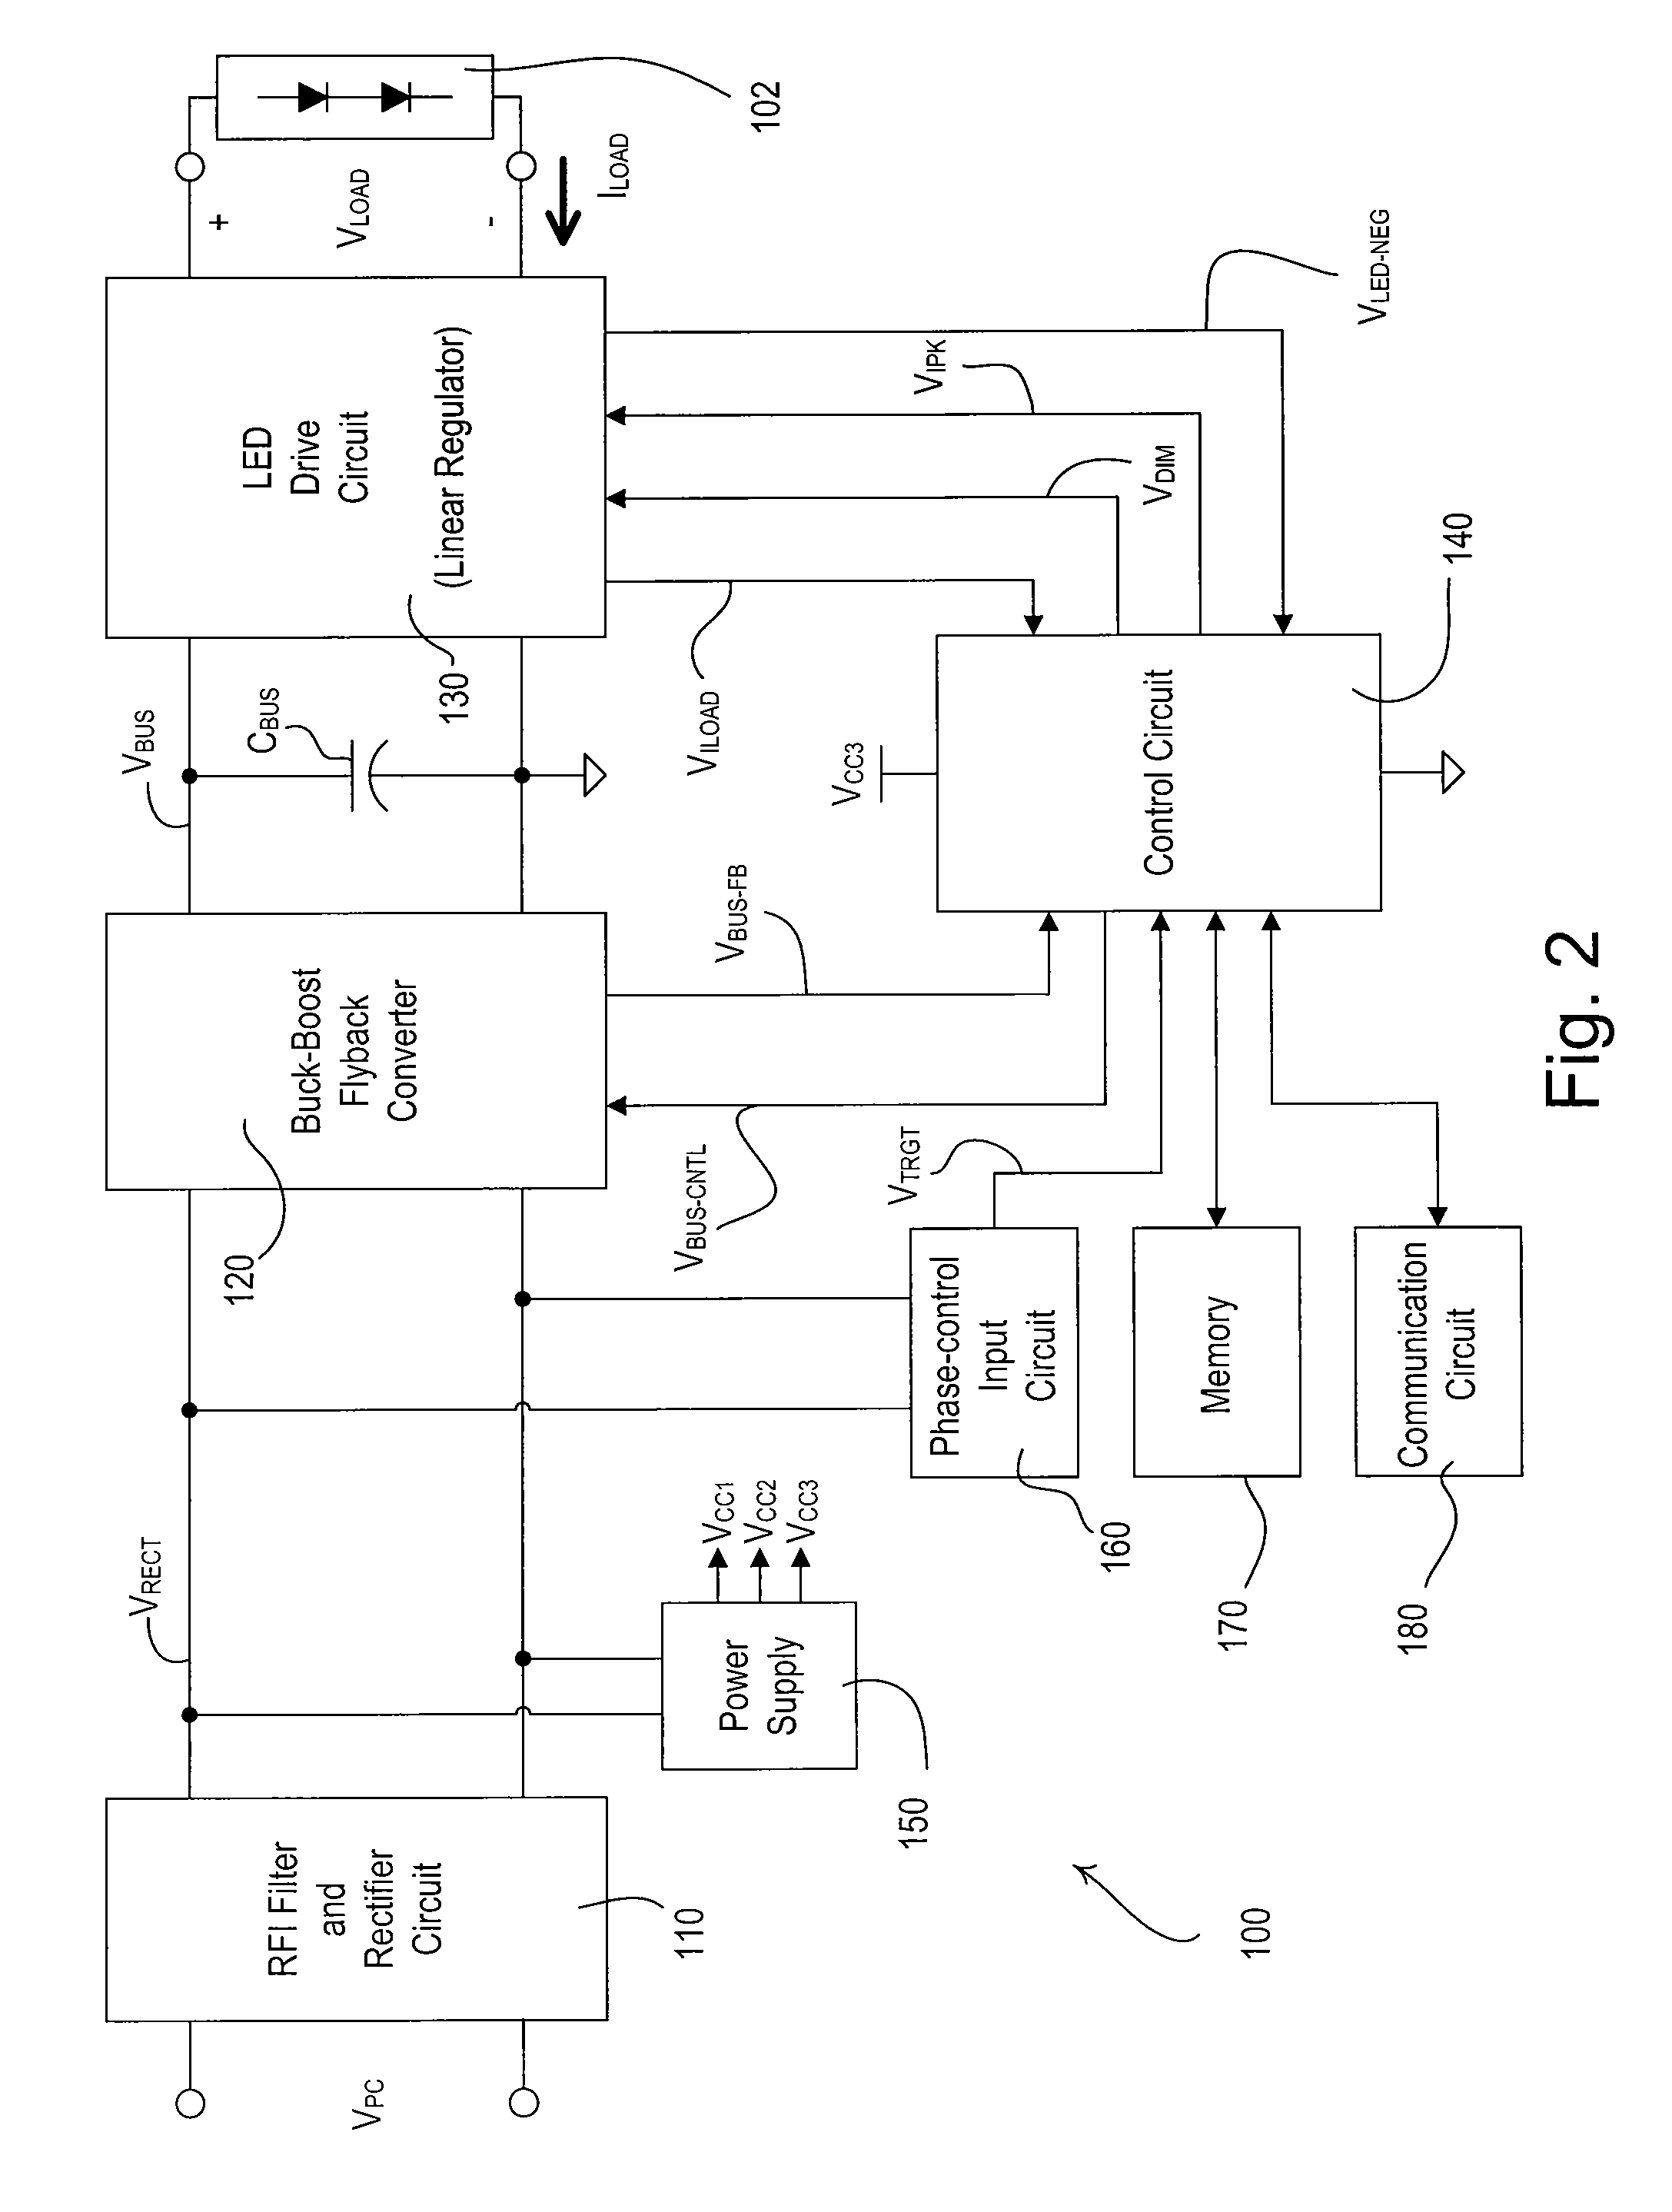 Configurable load control device for light-emitting diode light sources